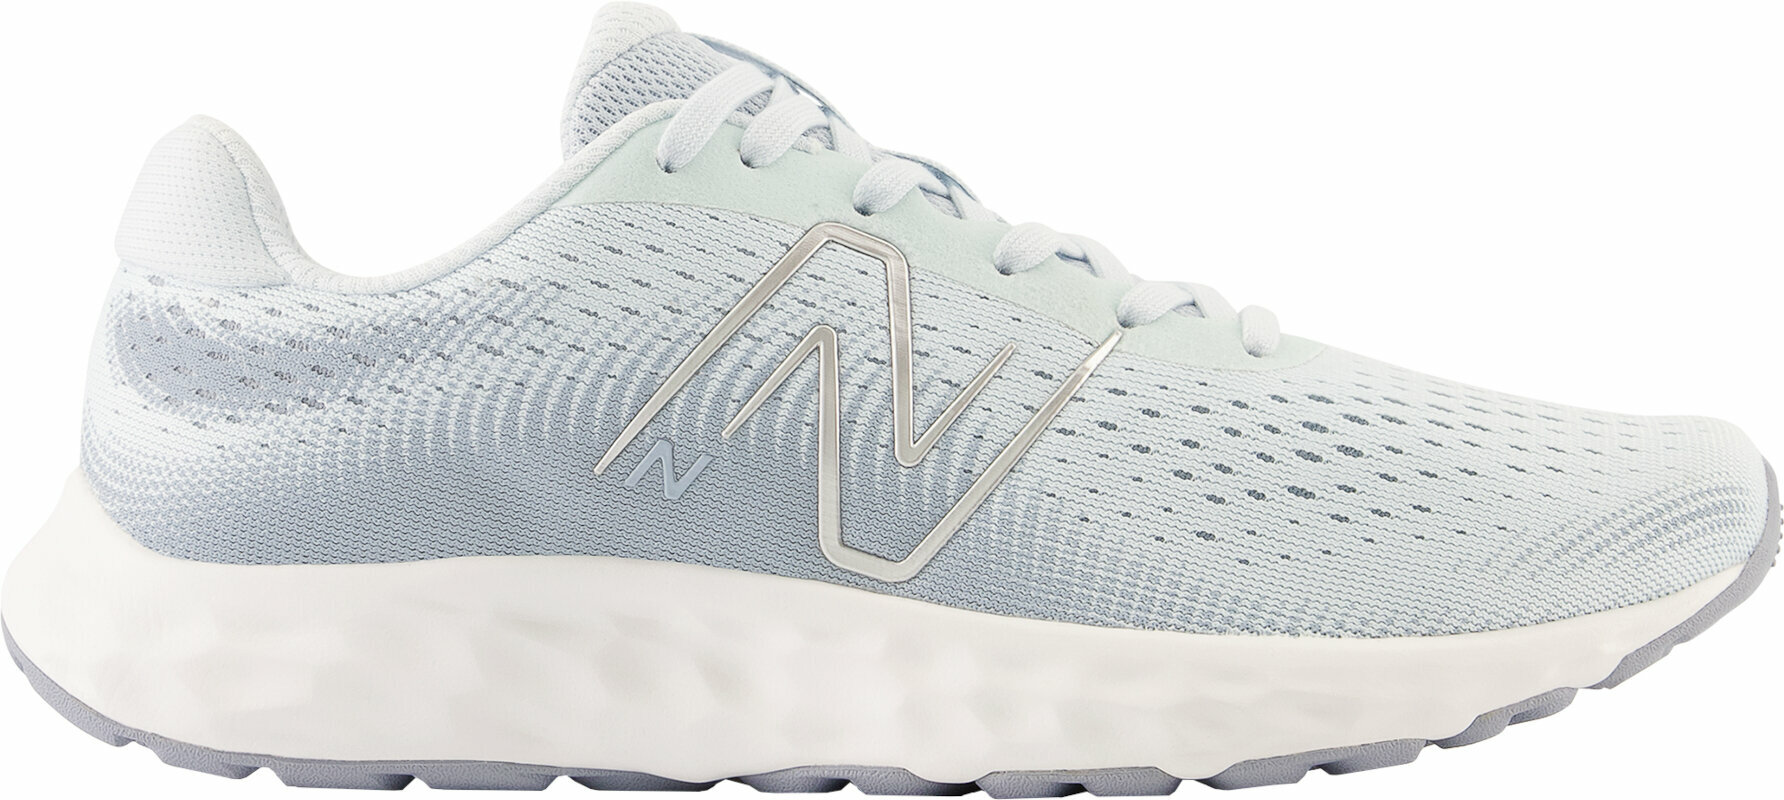 Road running shoes
 New Balance Womens W520 Ice Blue 38 Road running shoes